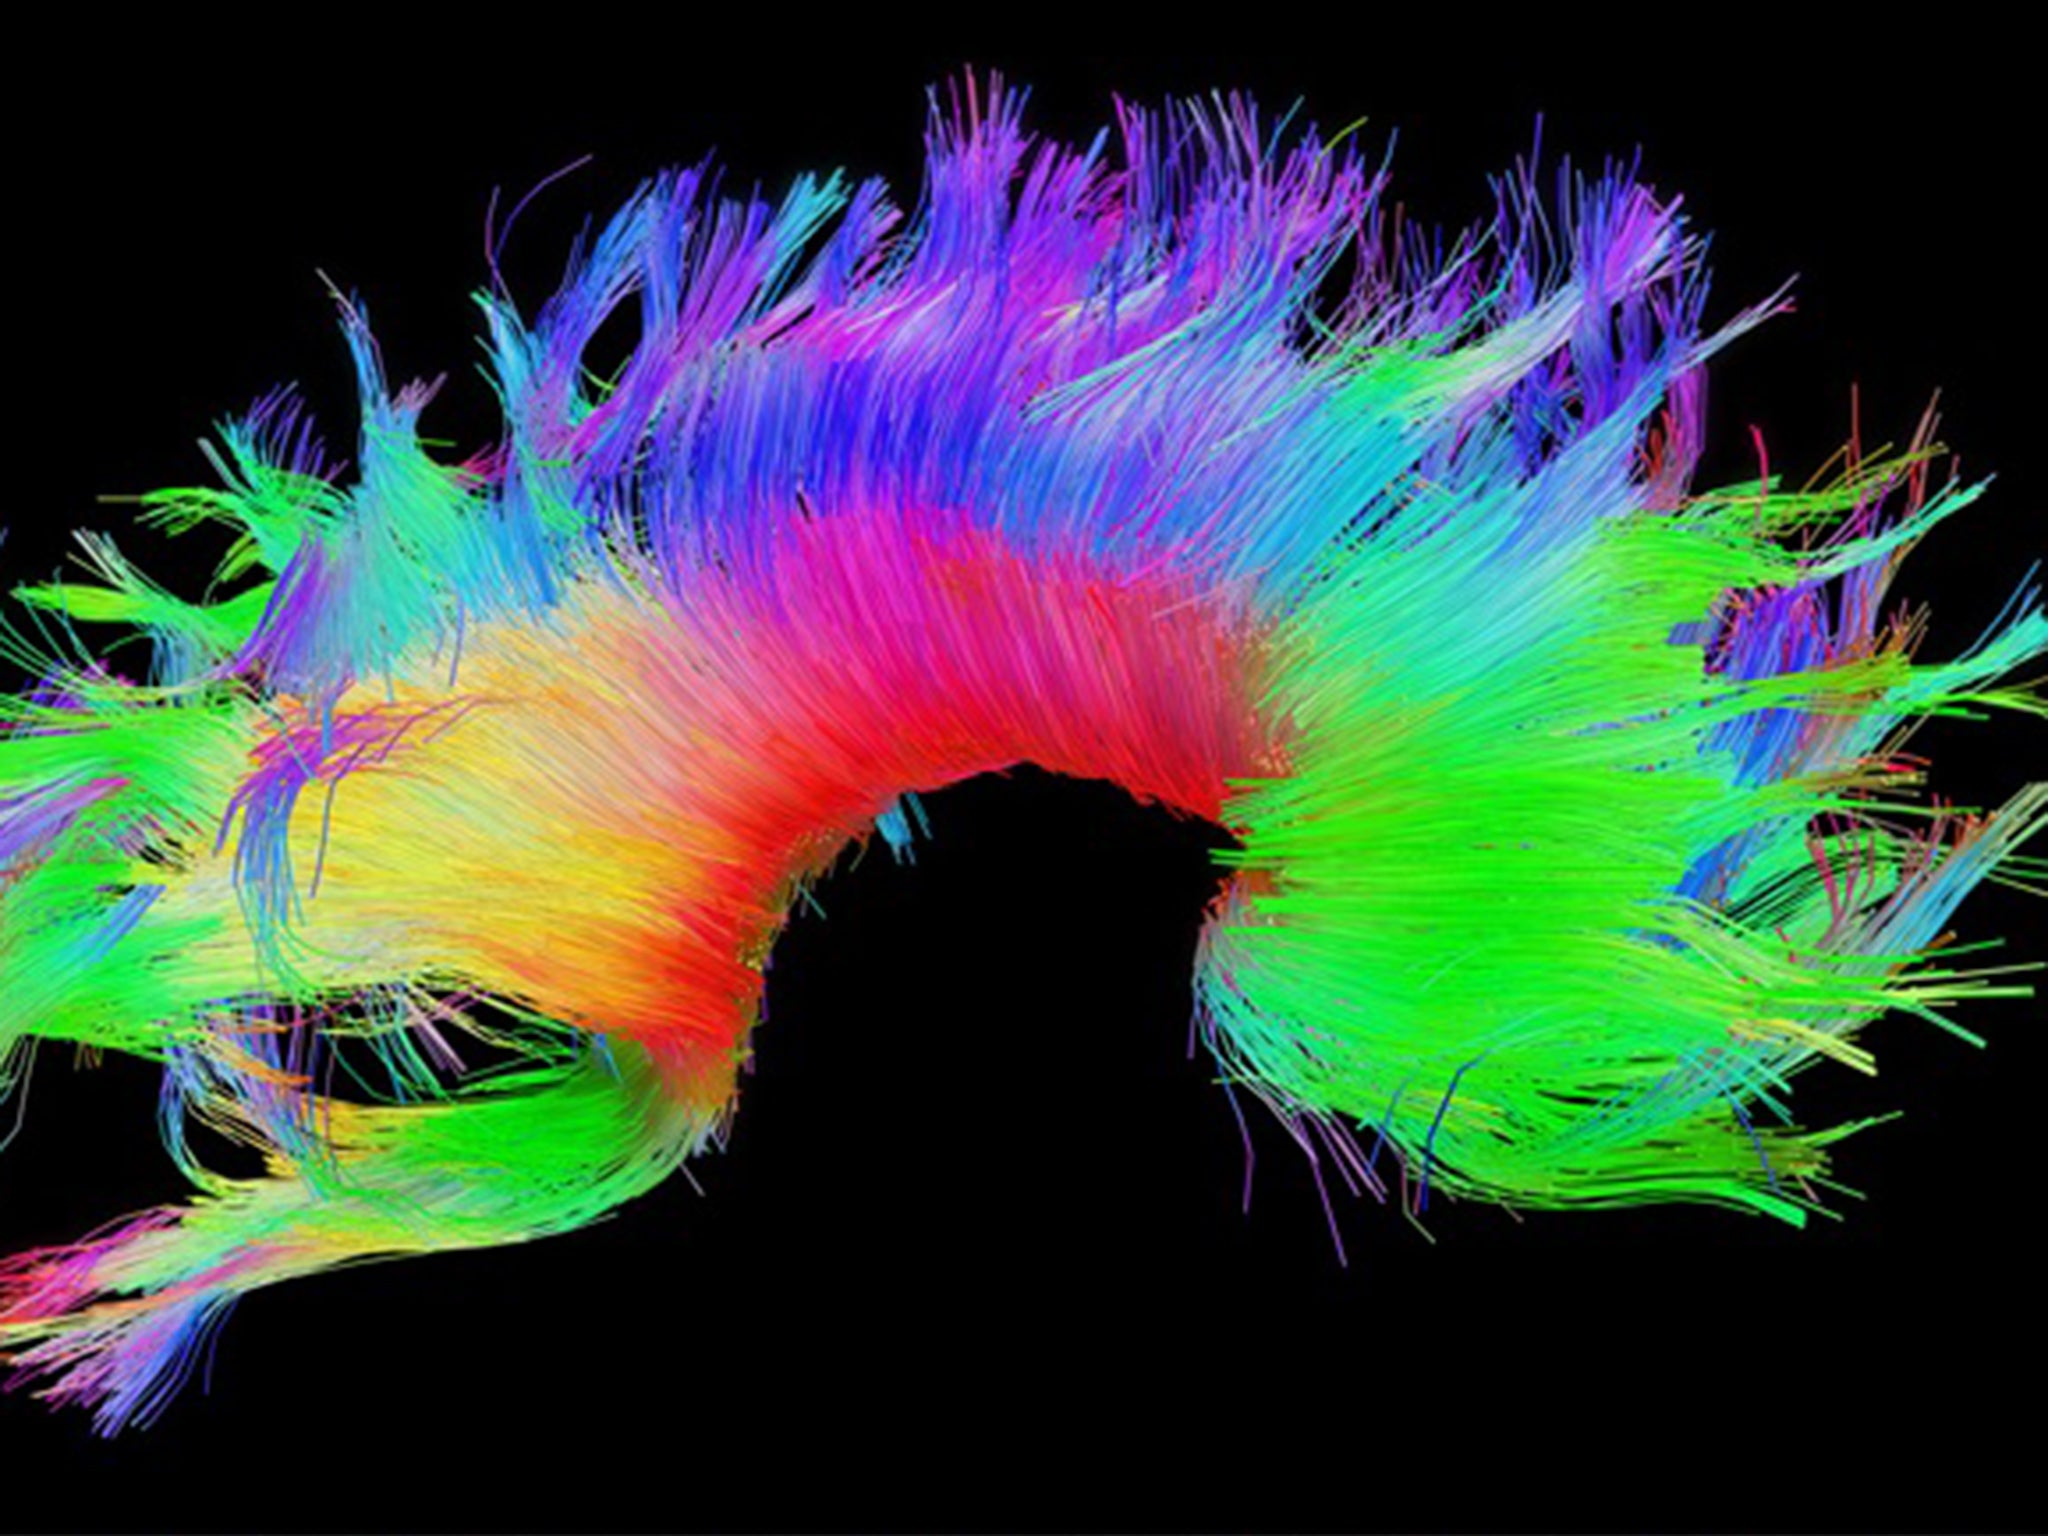 The internet has changed how our brains interact with some data